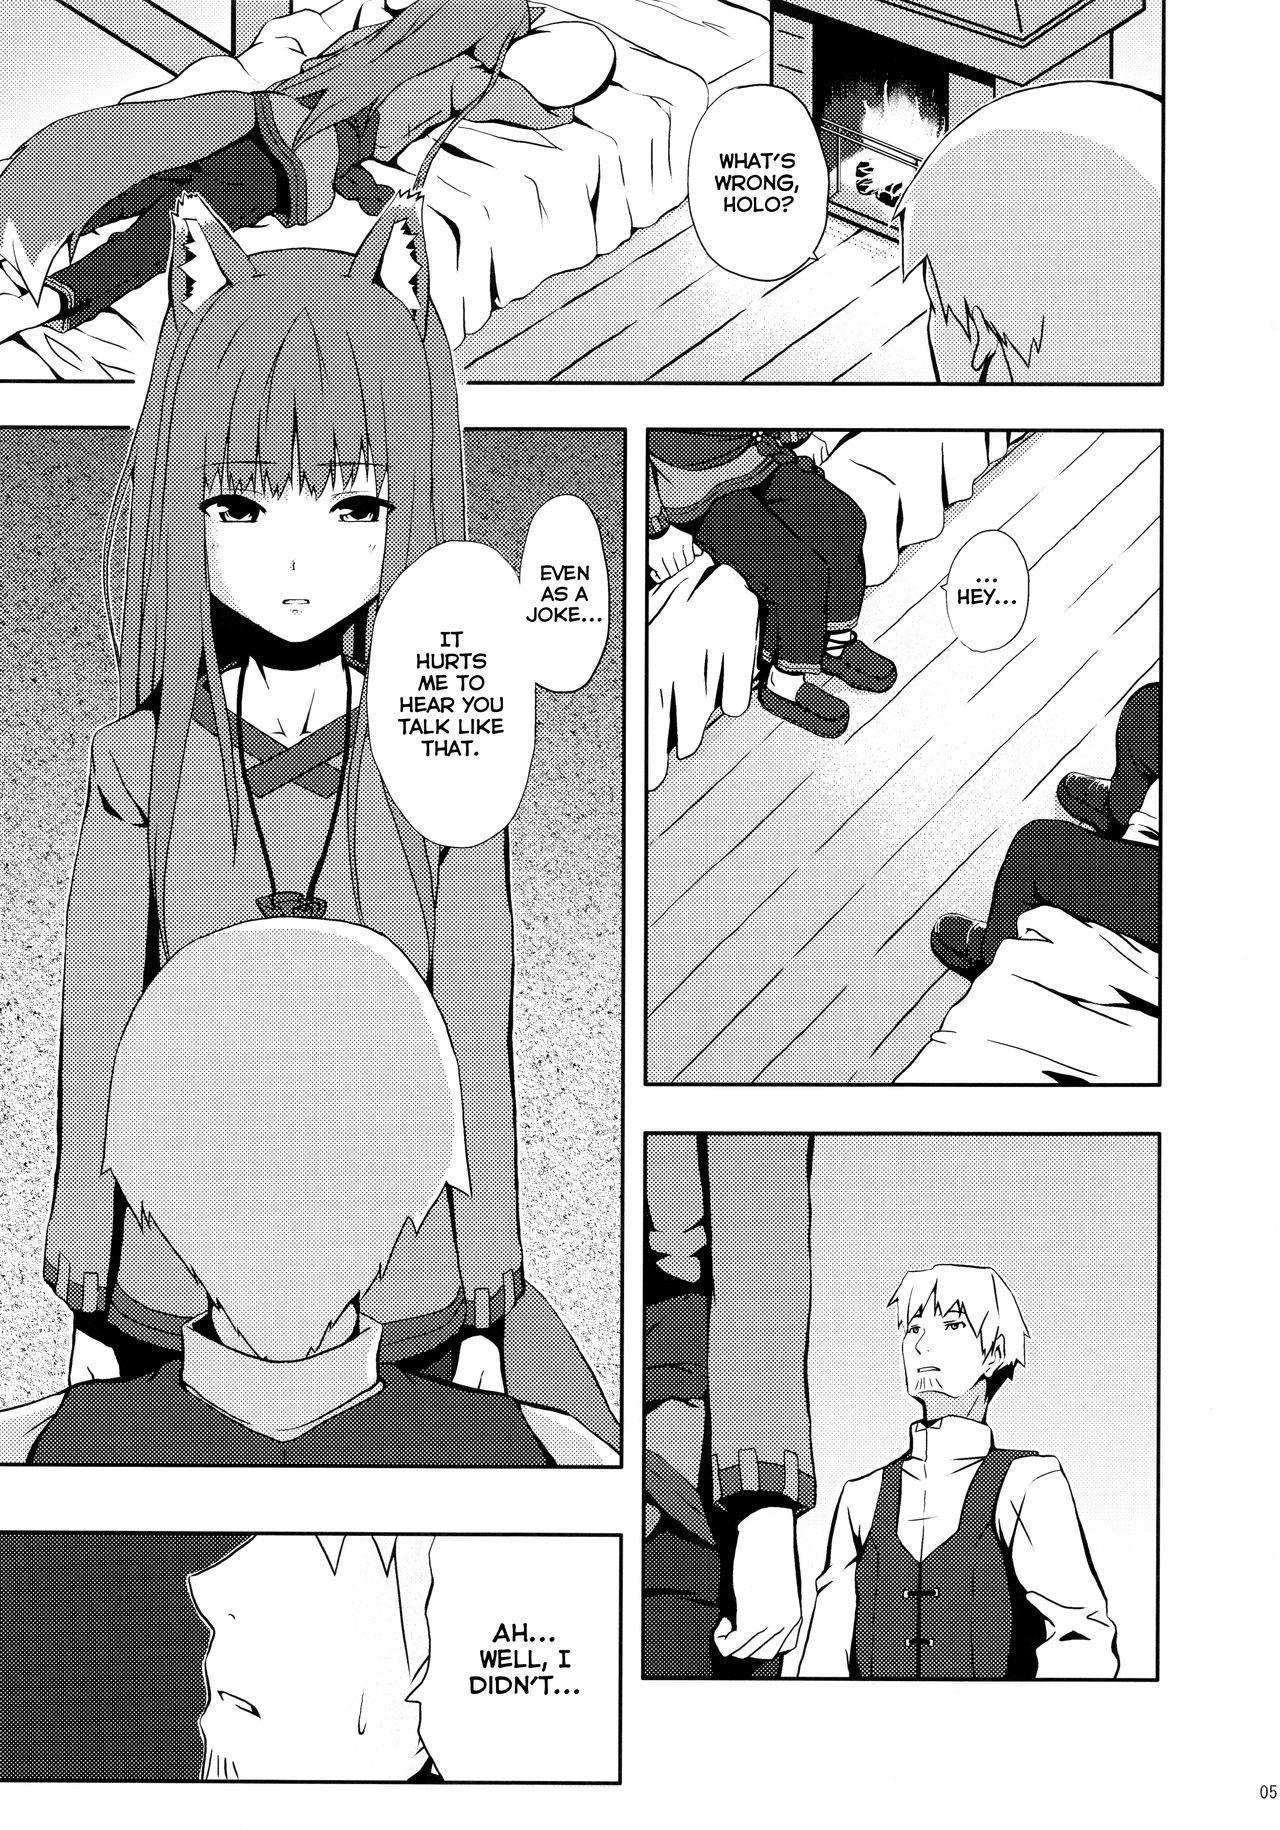 Body Massage Bitter Apple - Spice and wolf Linda - Page 5